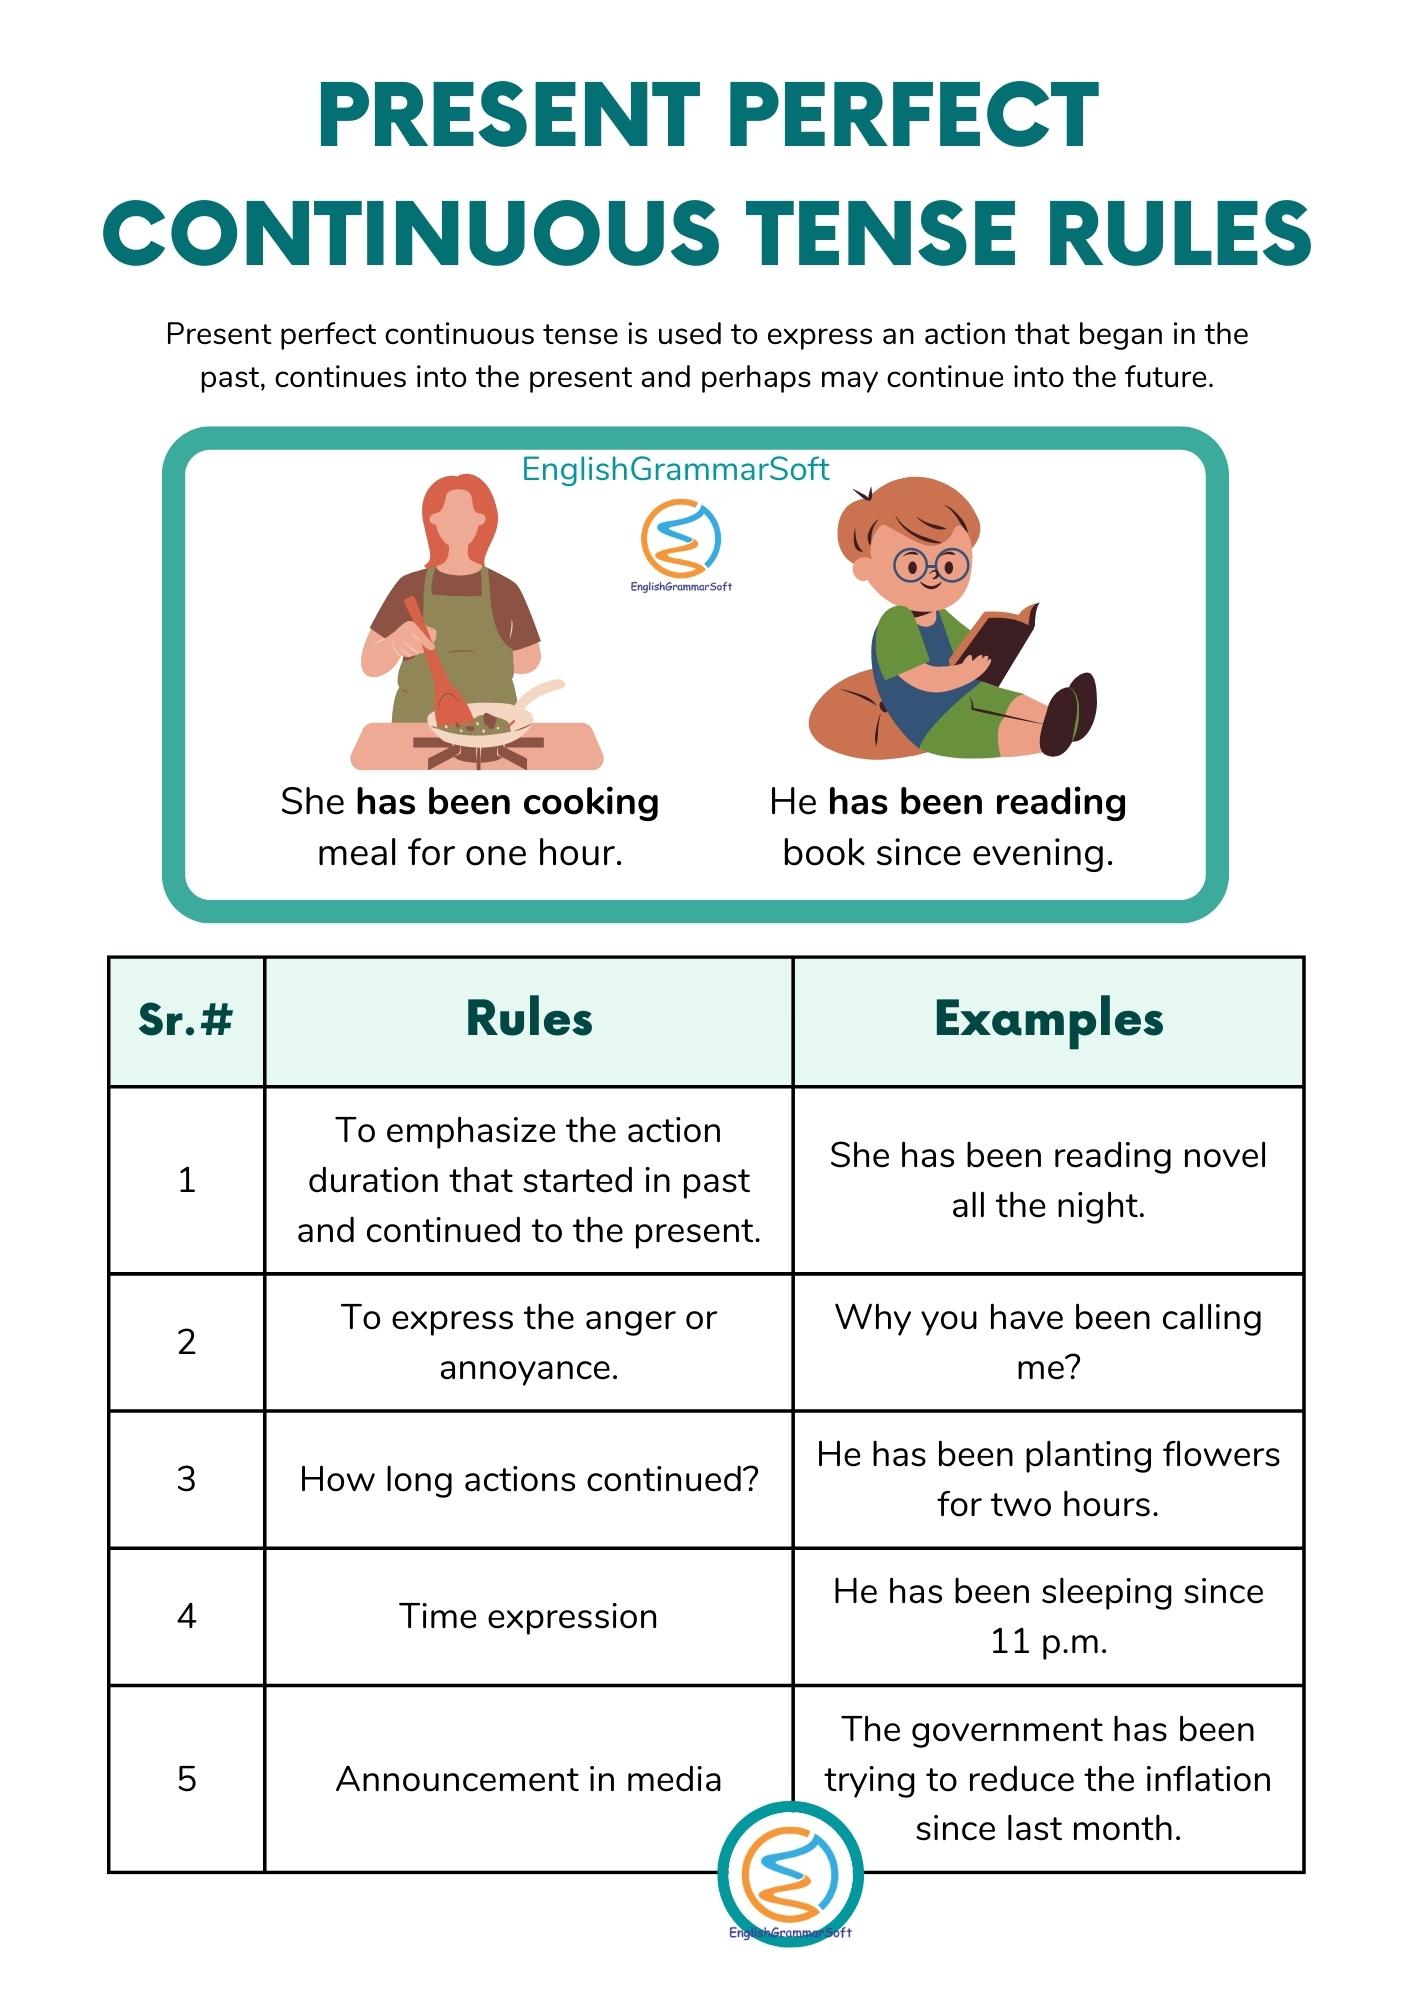 Present Perfect Continuous Tense Rules